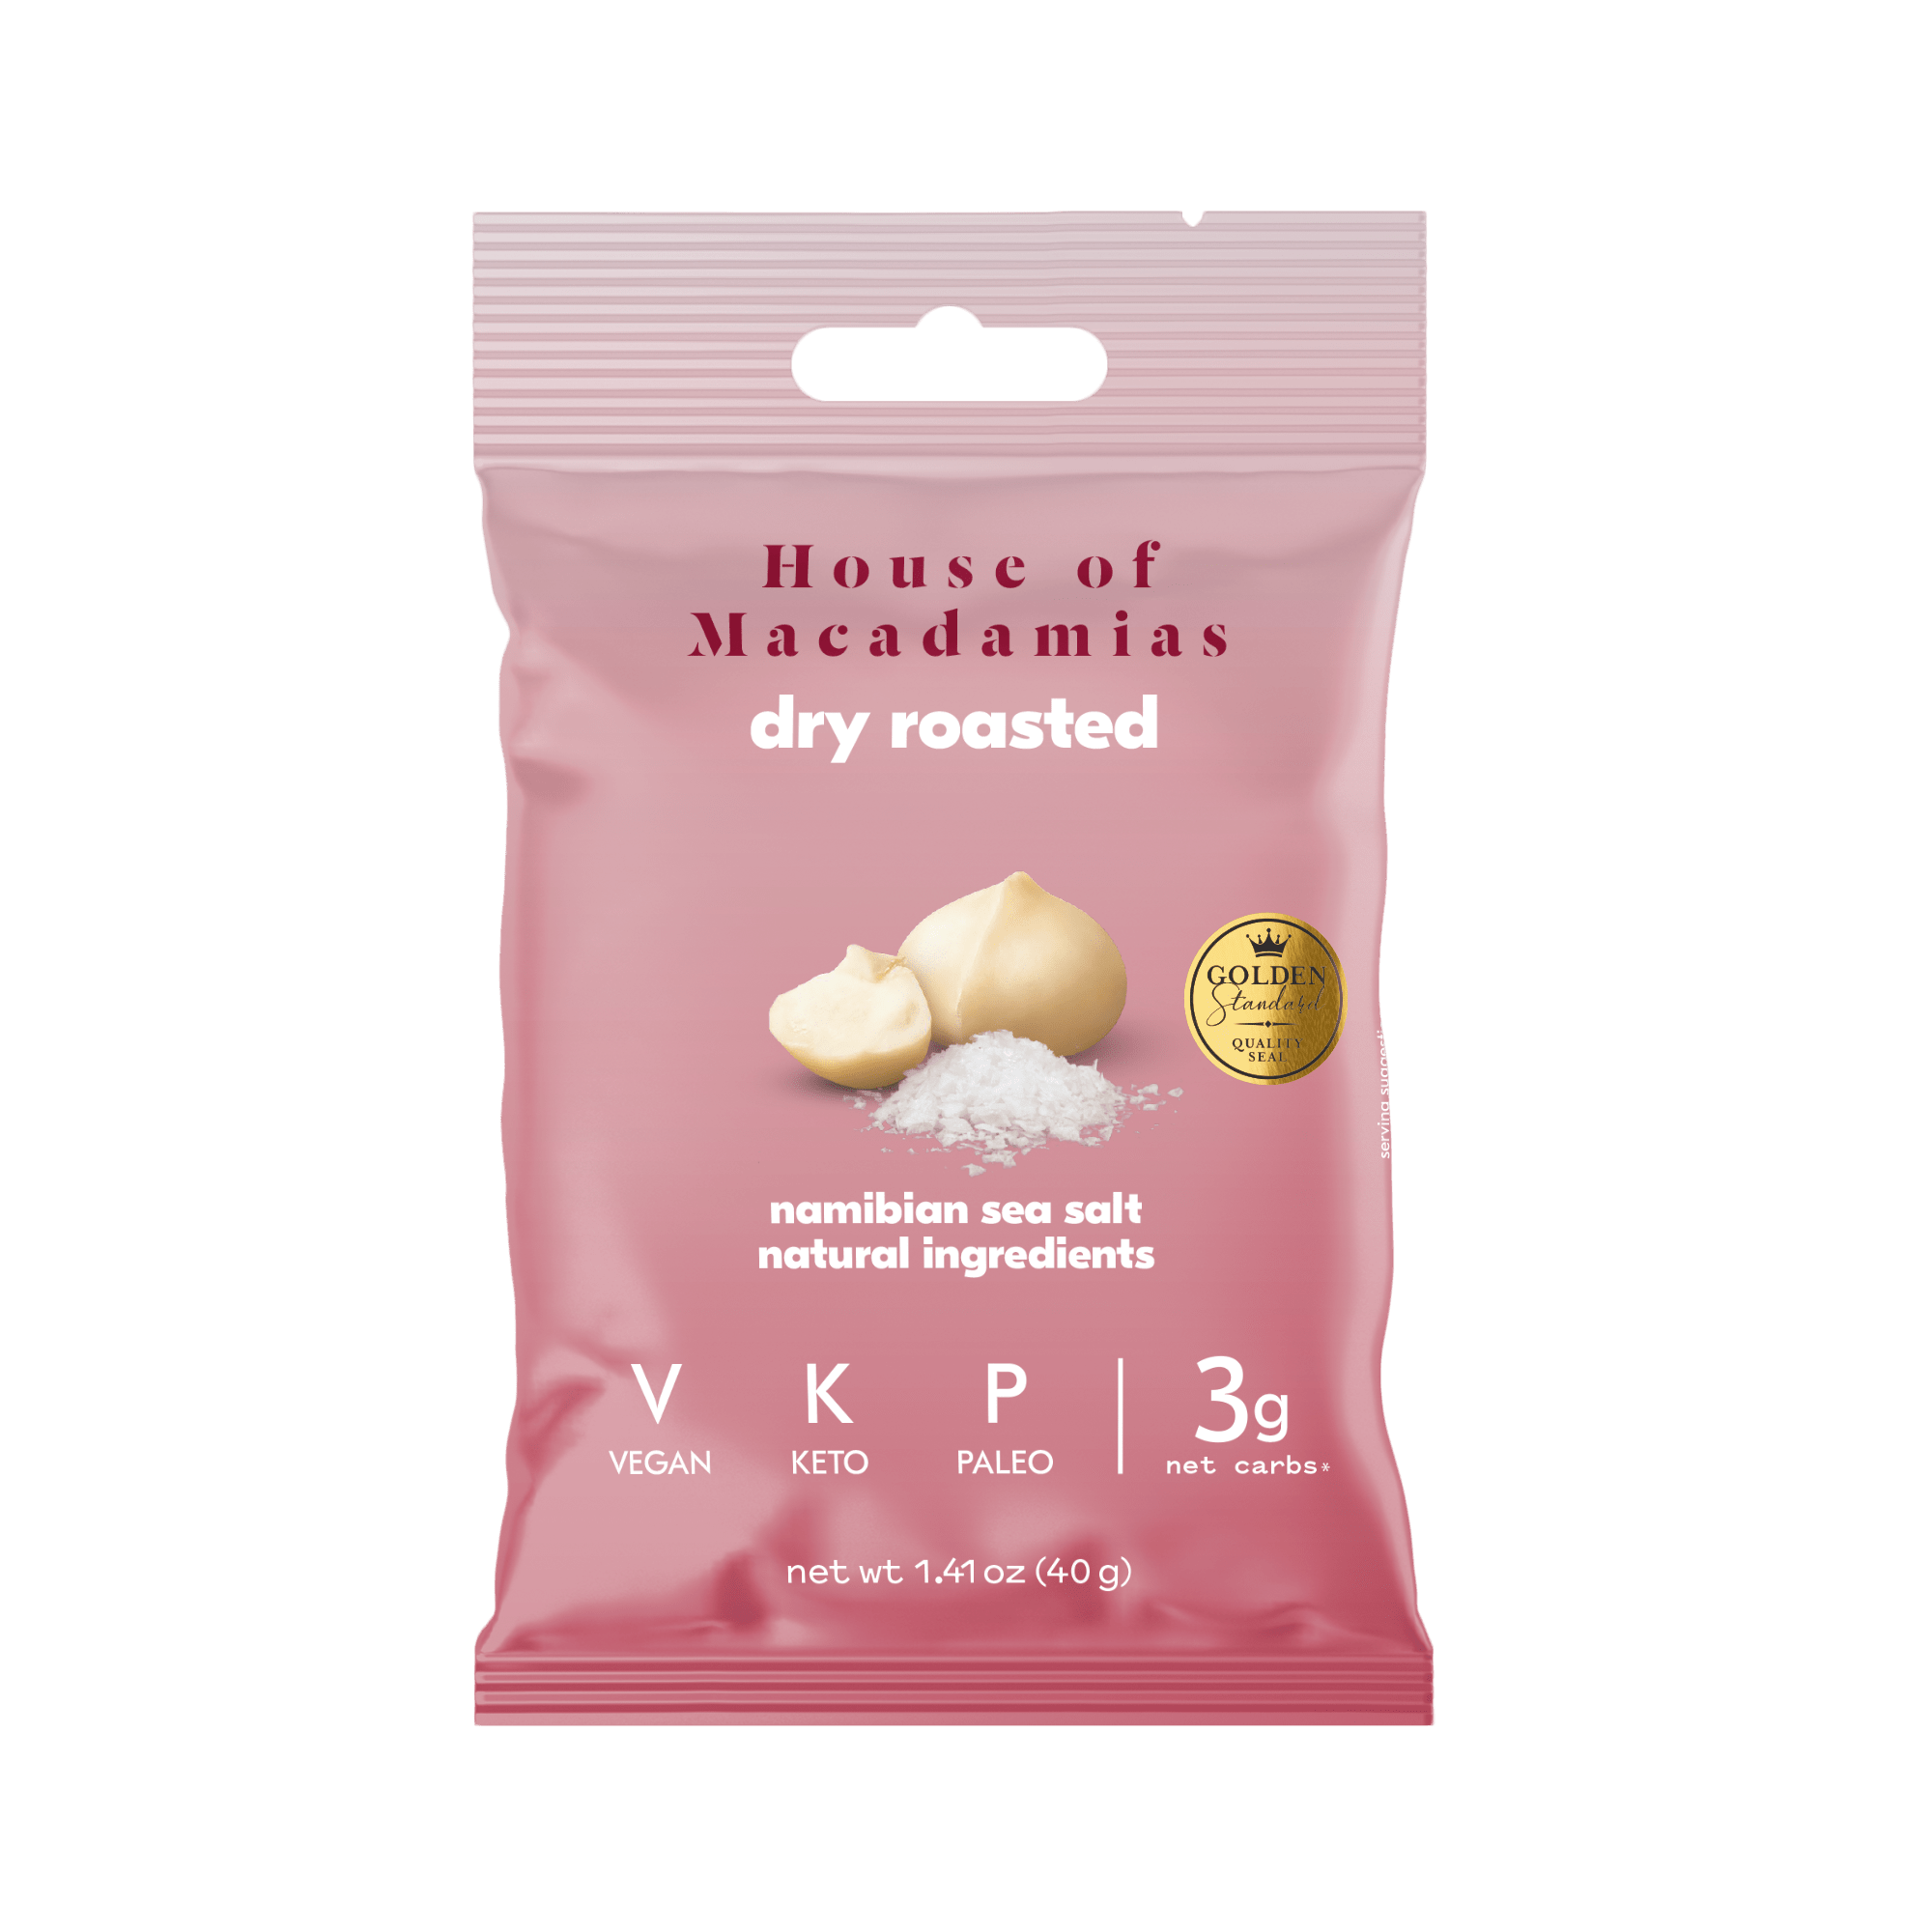 Macadamia Nut Variety Pack (6 Flavors, 12 Bags) - House of Macadamias - all types of nuts